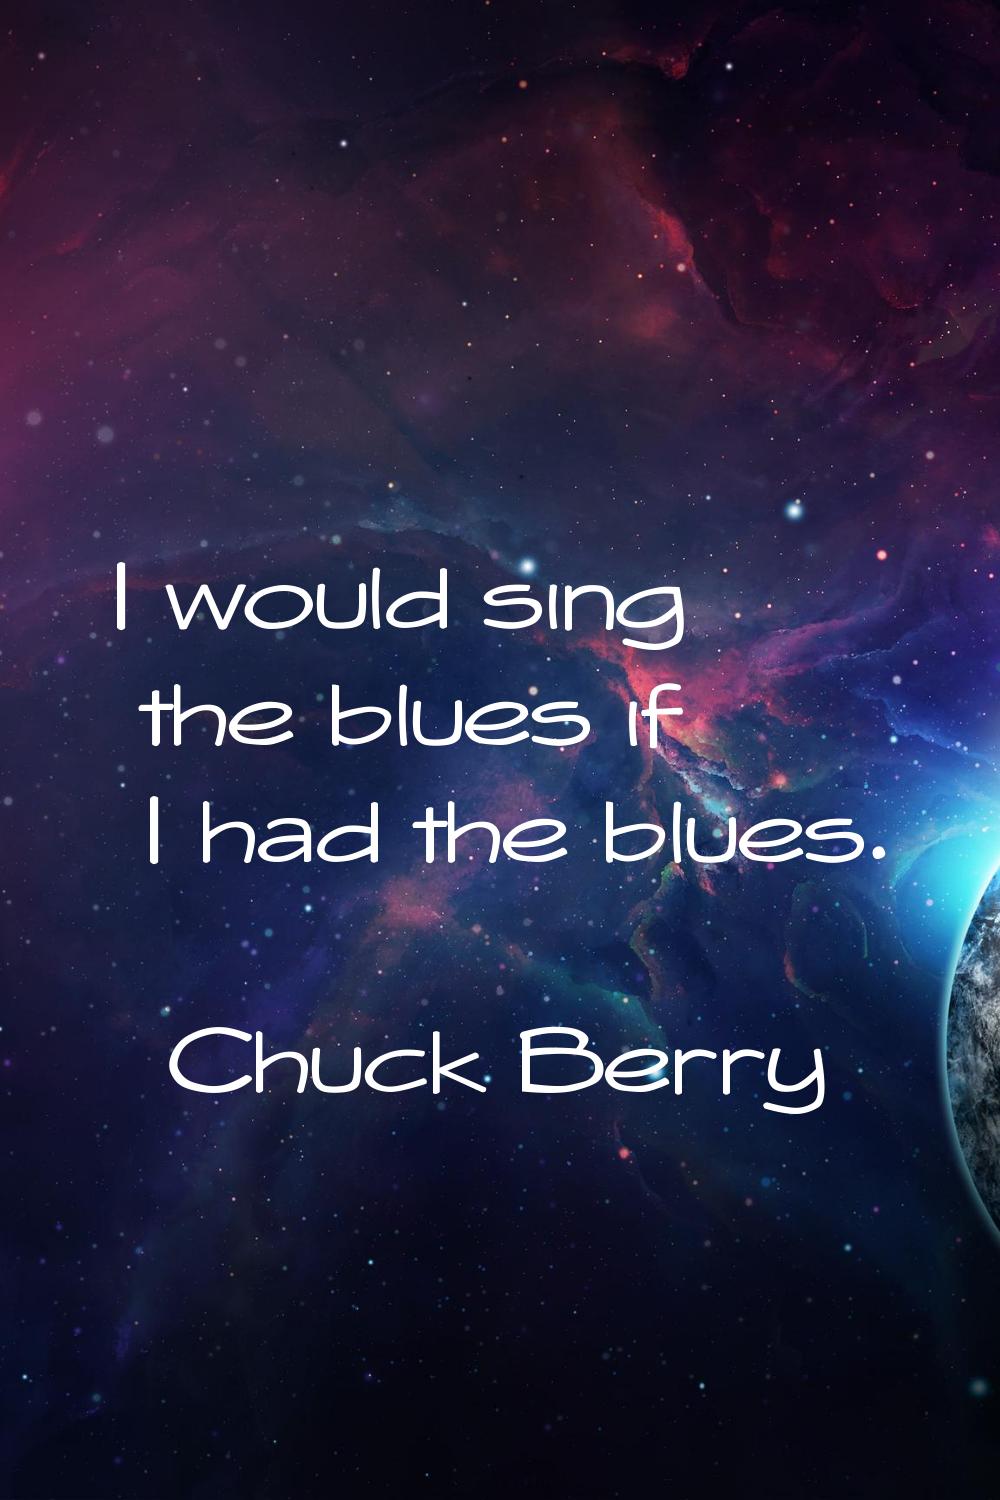 I would sing the blues if I had the blues.